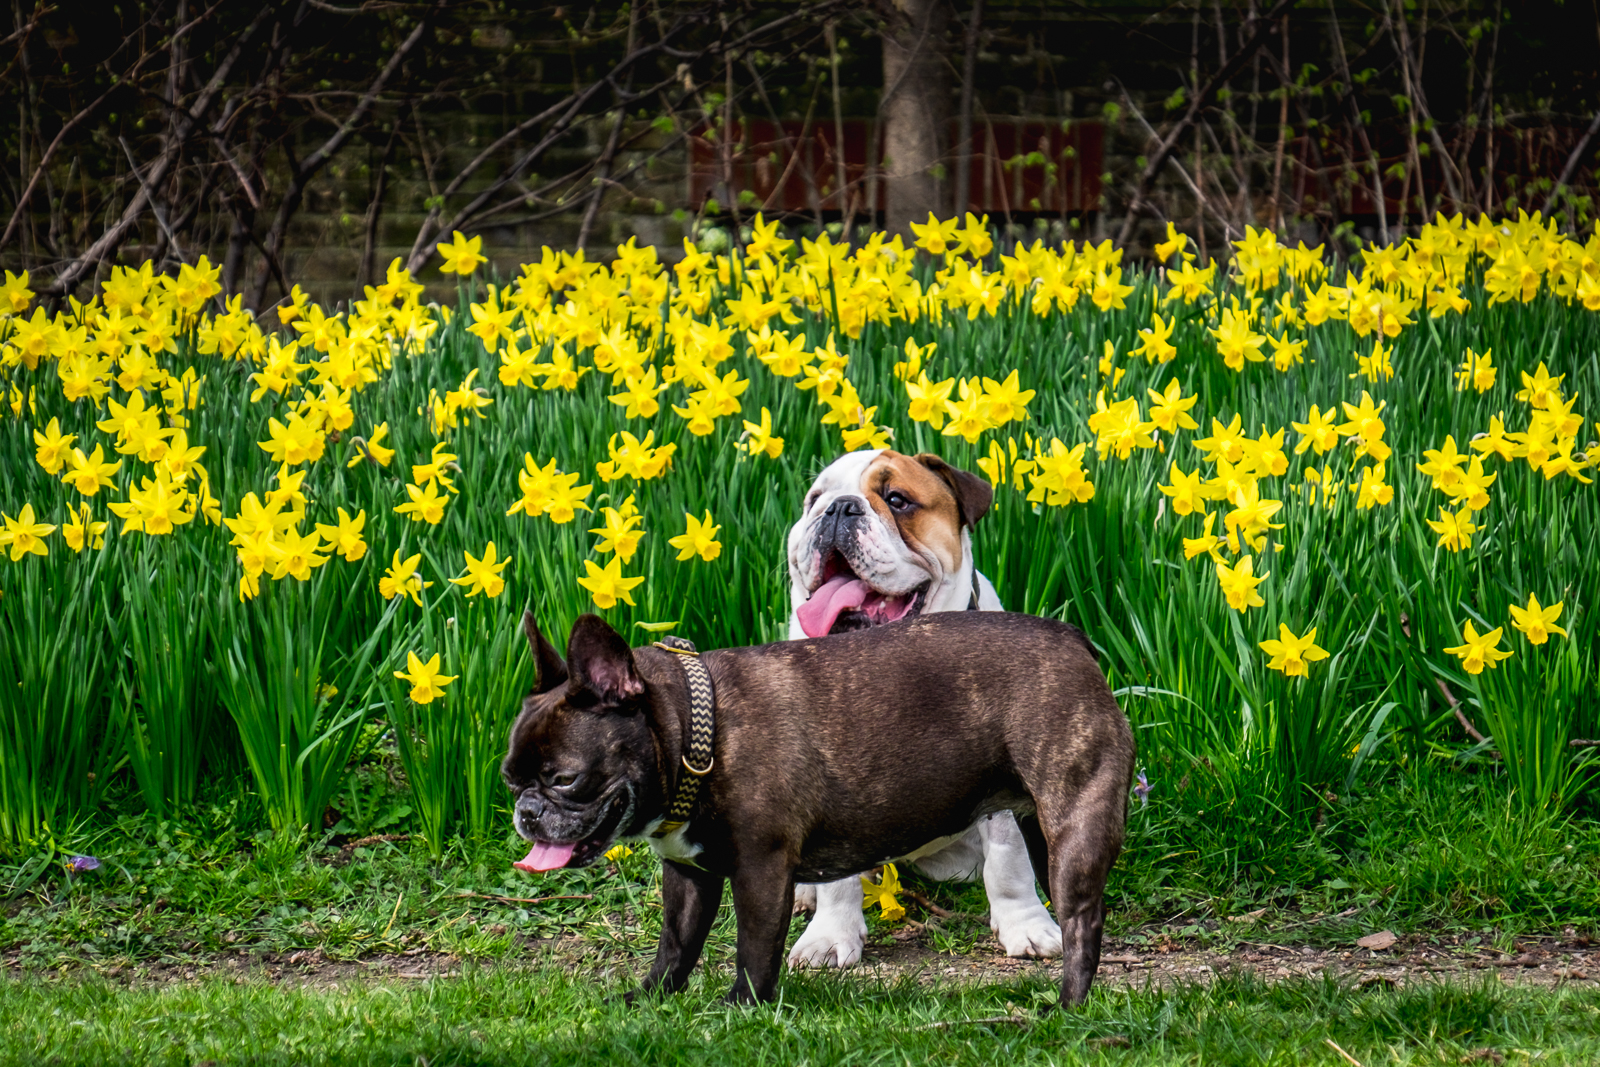 20170311_Tower-Hamlets_Ropemakers-Field_Daffodils-are-for-dogs-too